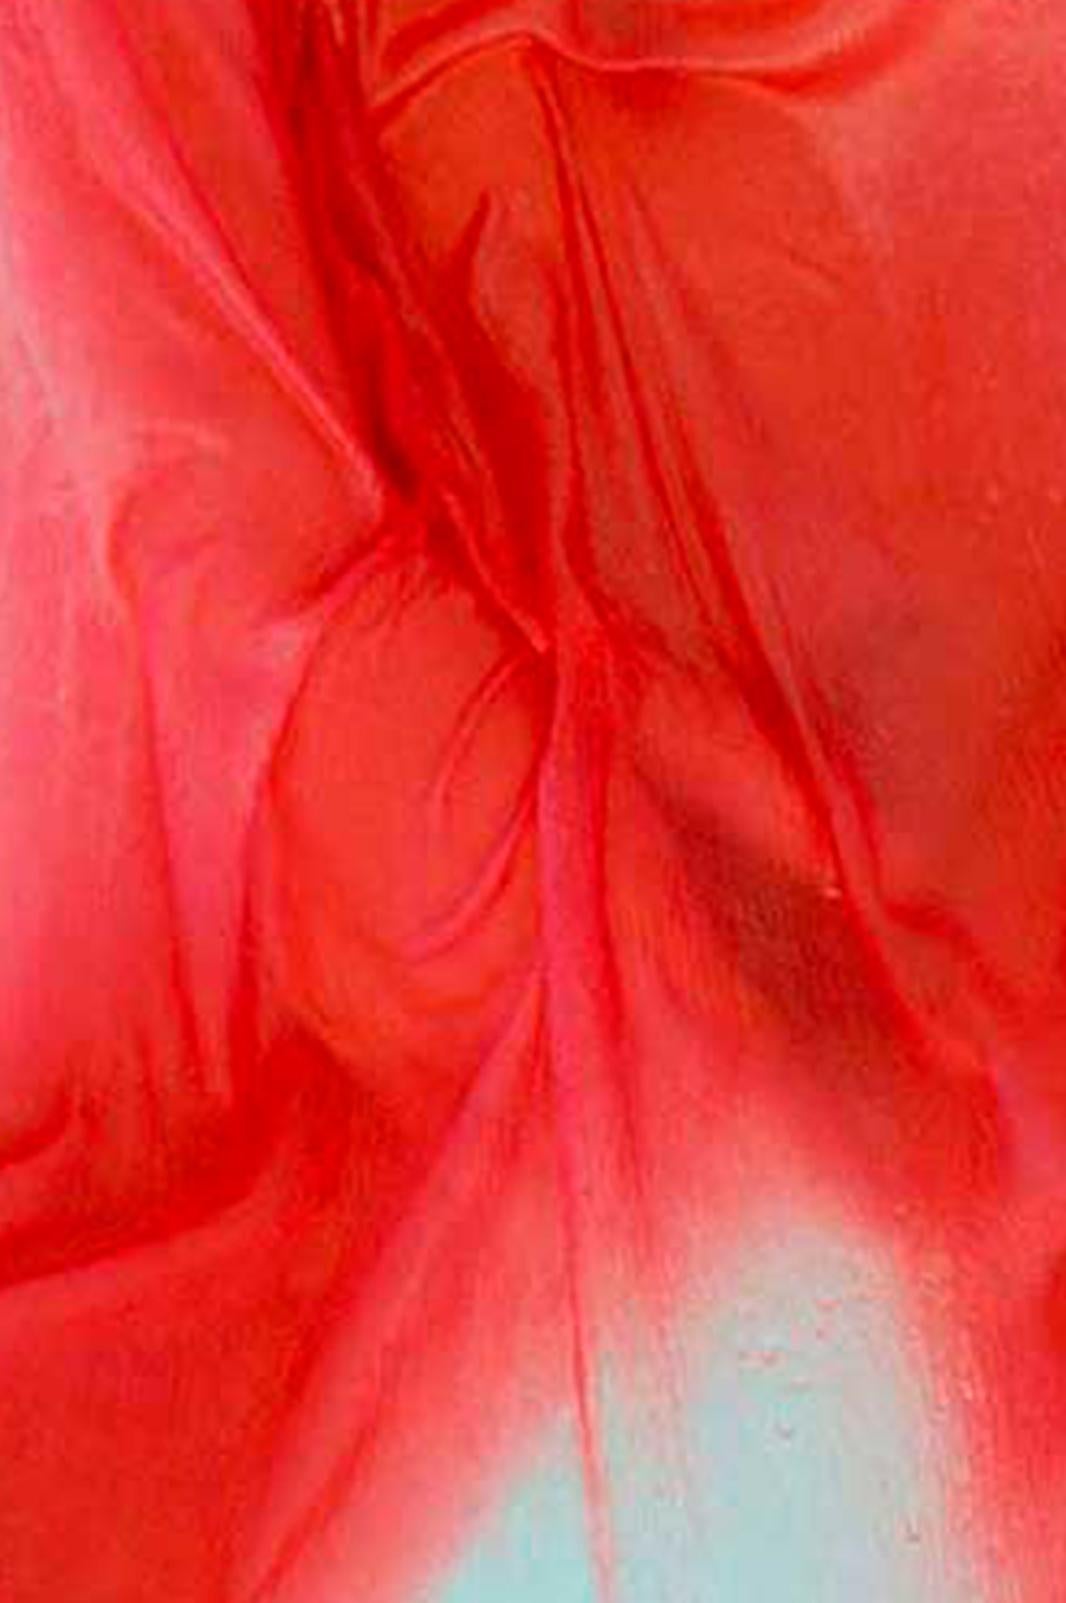 Les Voiles
H 35.5 in. x 27.5 in. W
Edition 6
Unframed.

Les Voiles Series
Uwe Ommer wanted to try a series that revealed less of the body using different wet veils in bright colors to create this sensual effect. 
_______________________________
Born